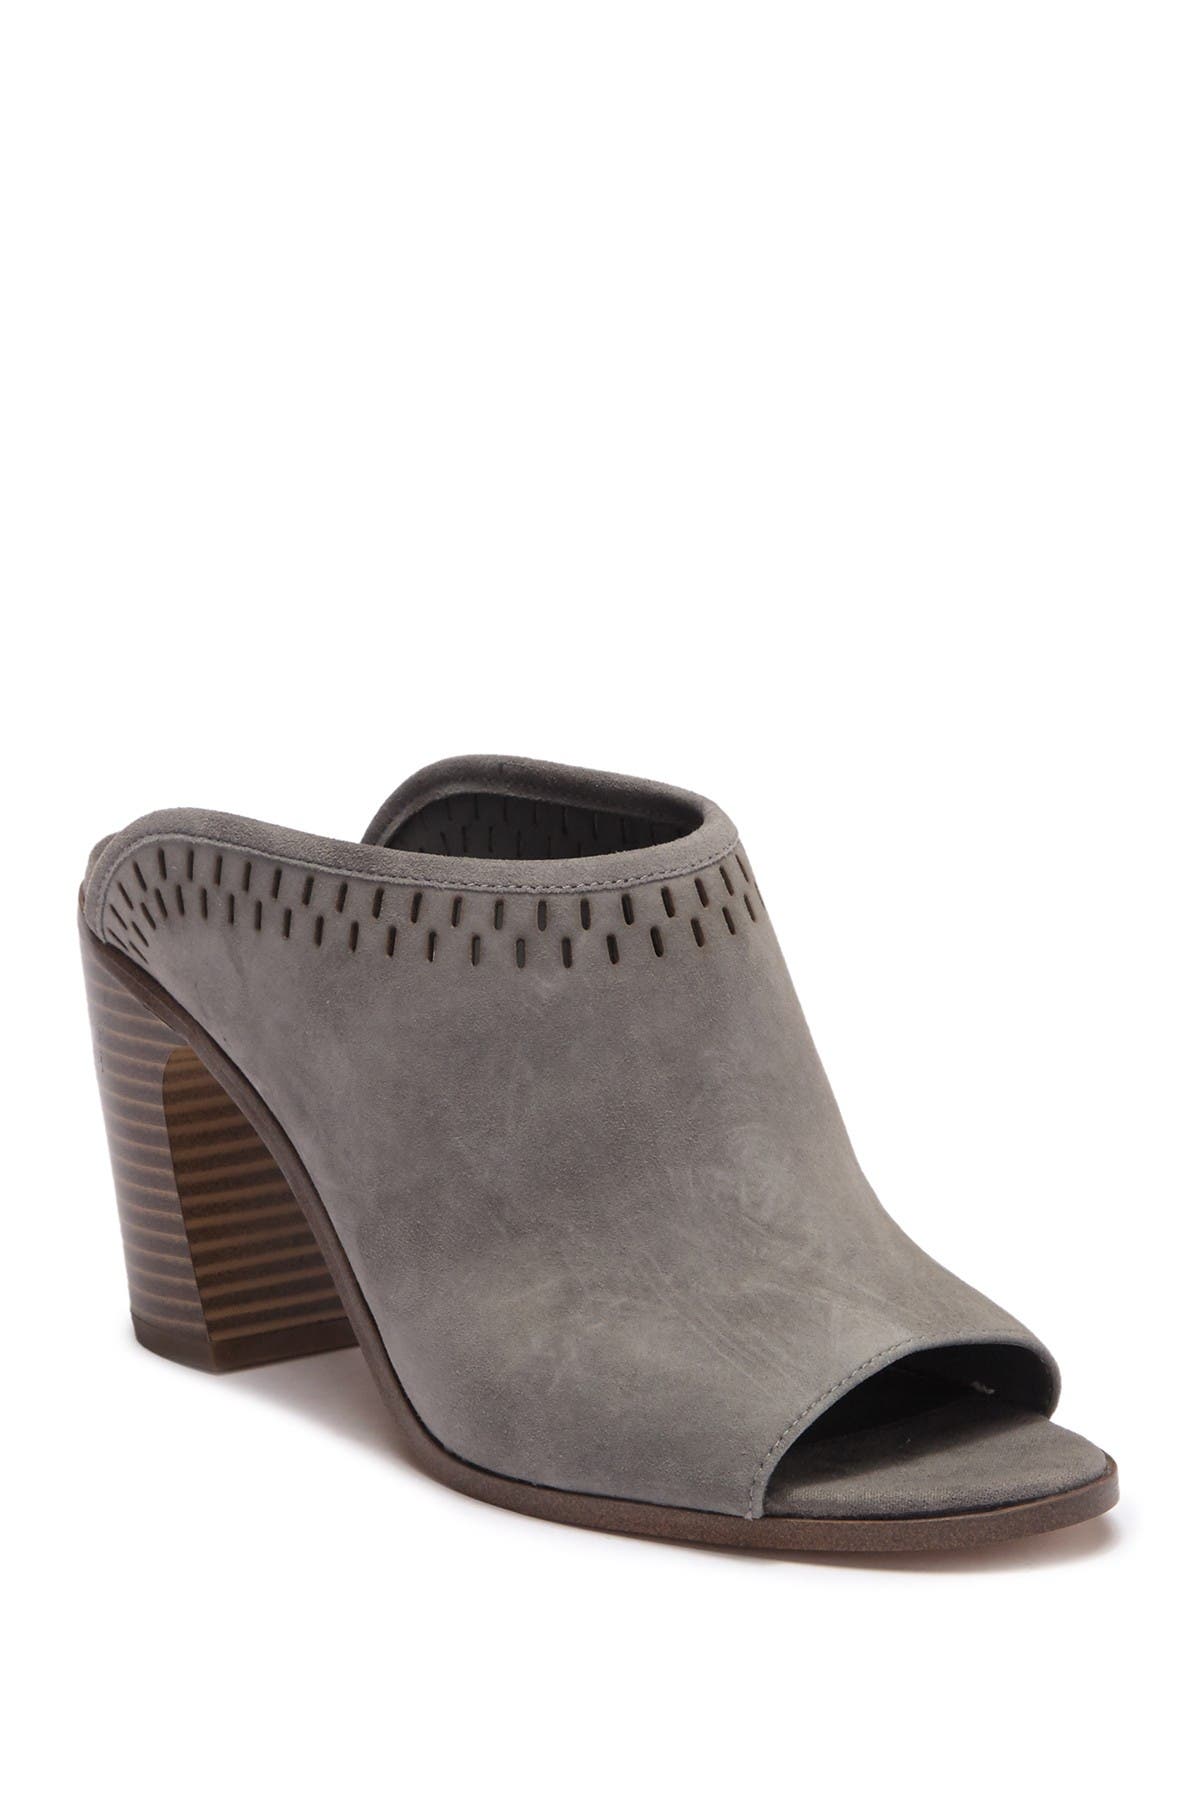 vince camuto mules